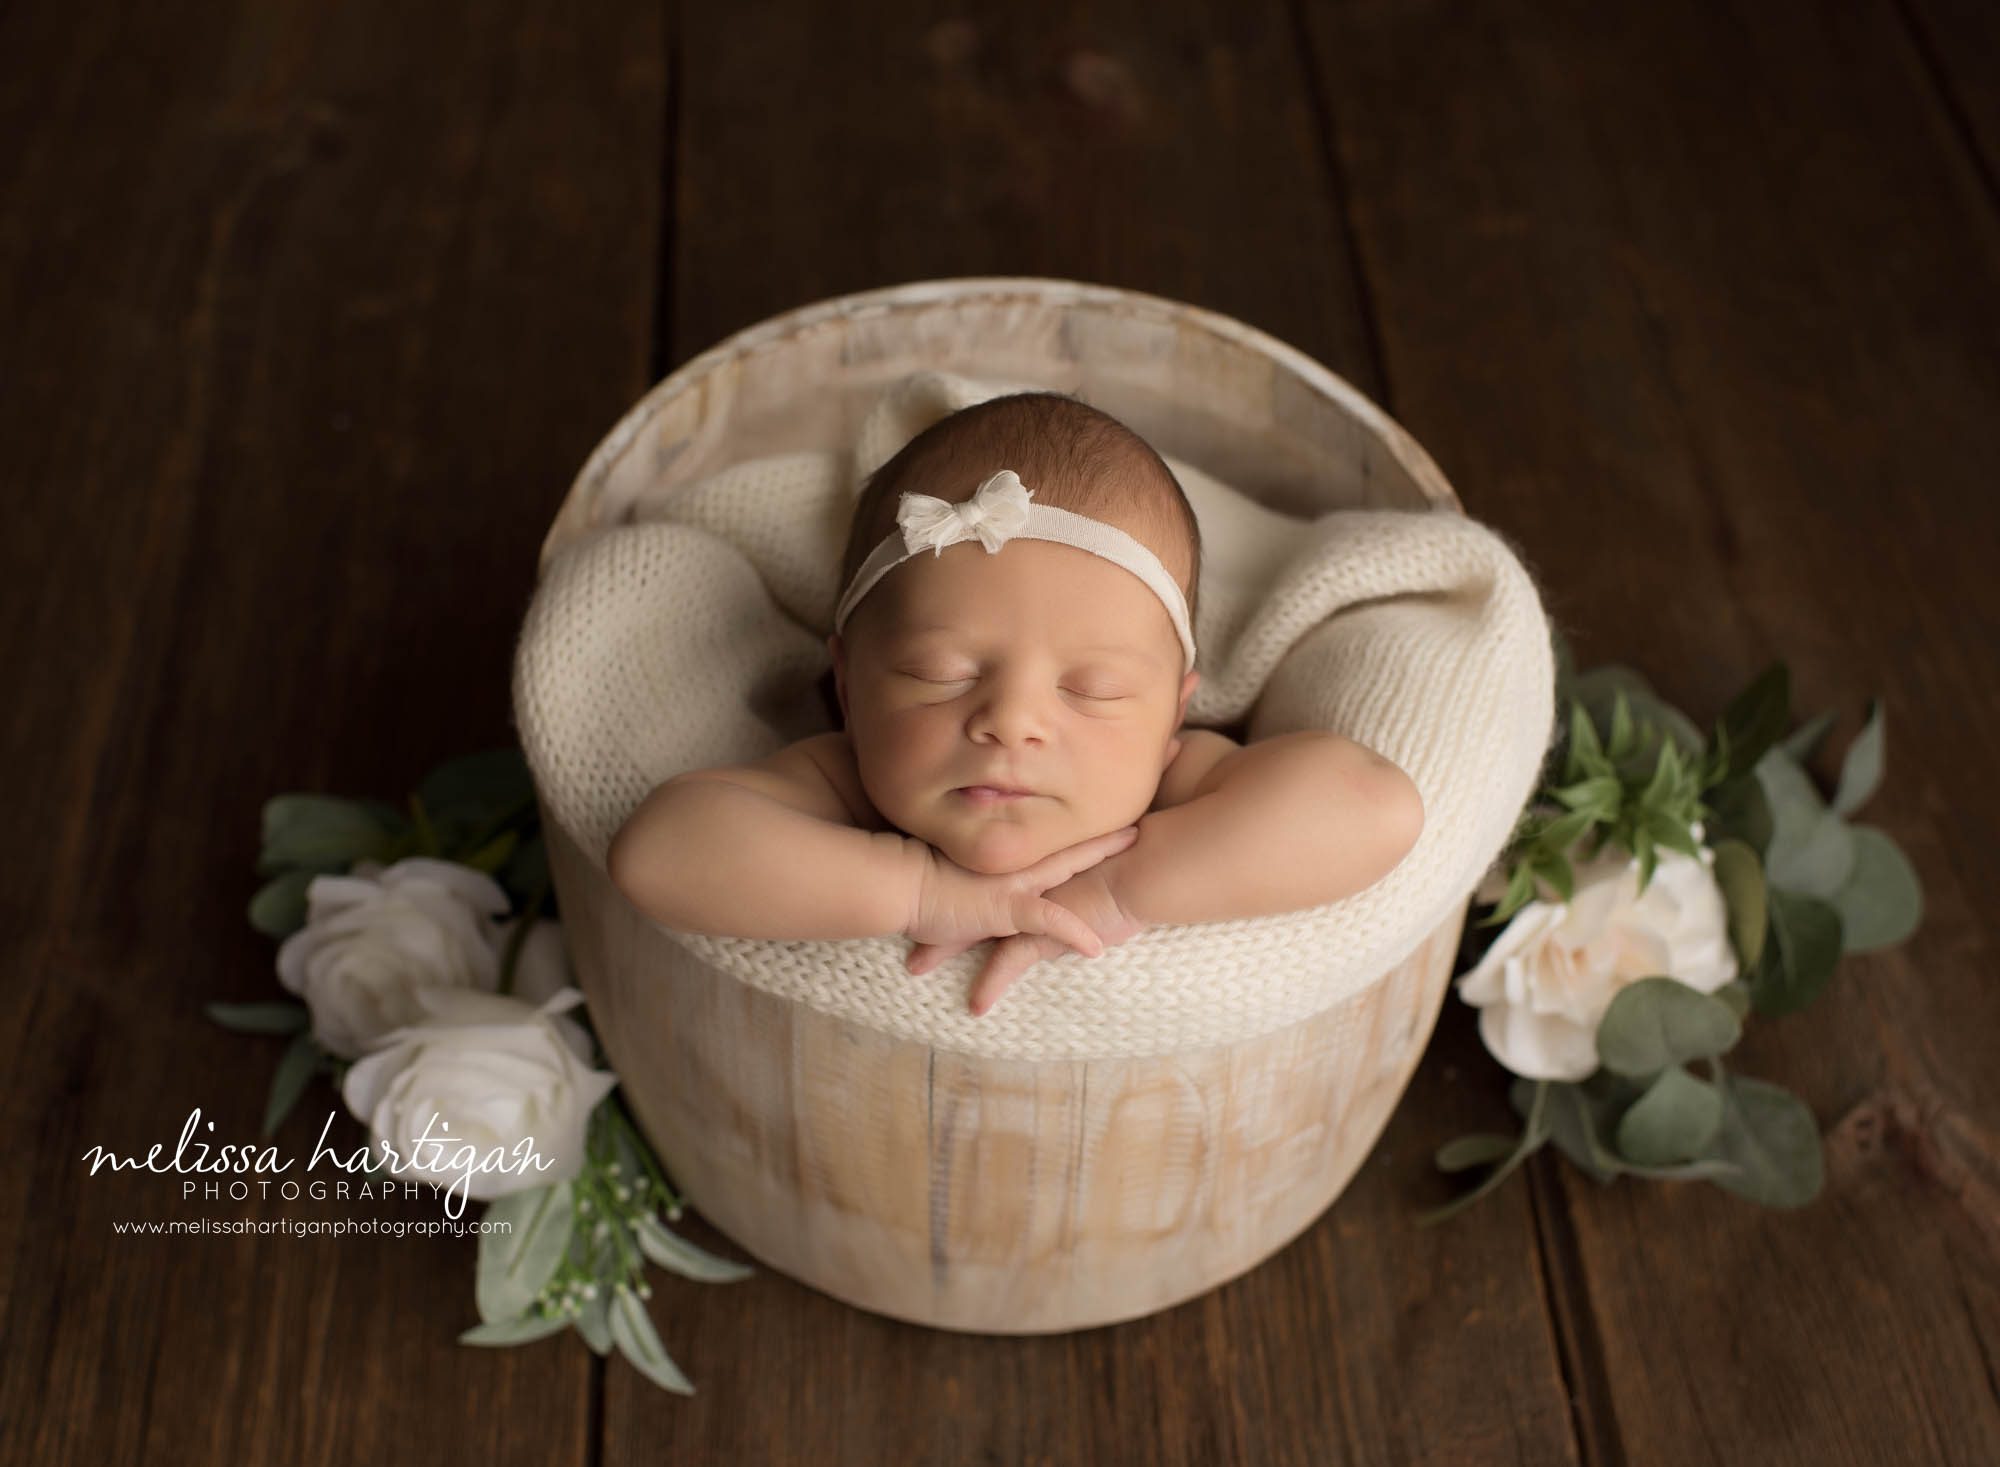 newborn baby girl posed in wooden barrel with cream knitted wrap wearing cream bow headband